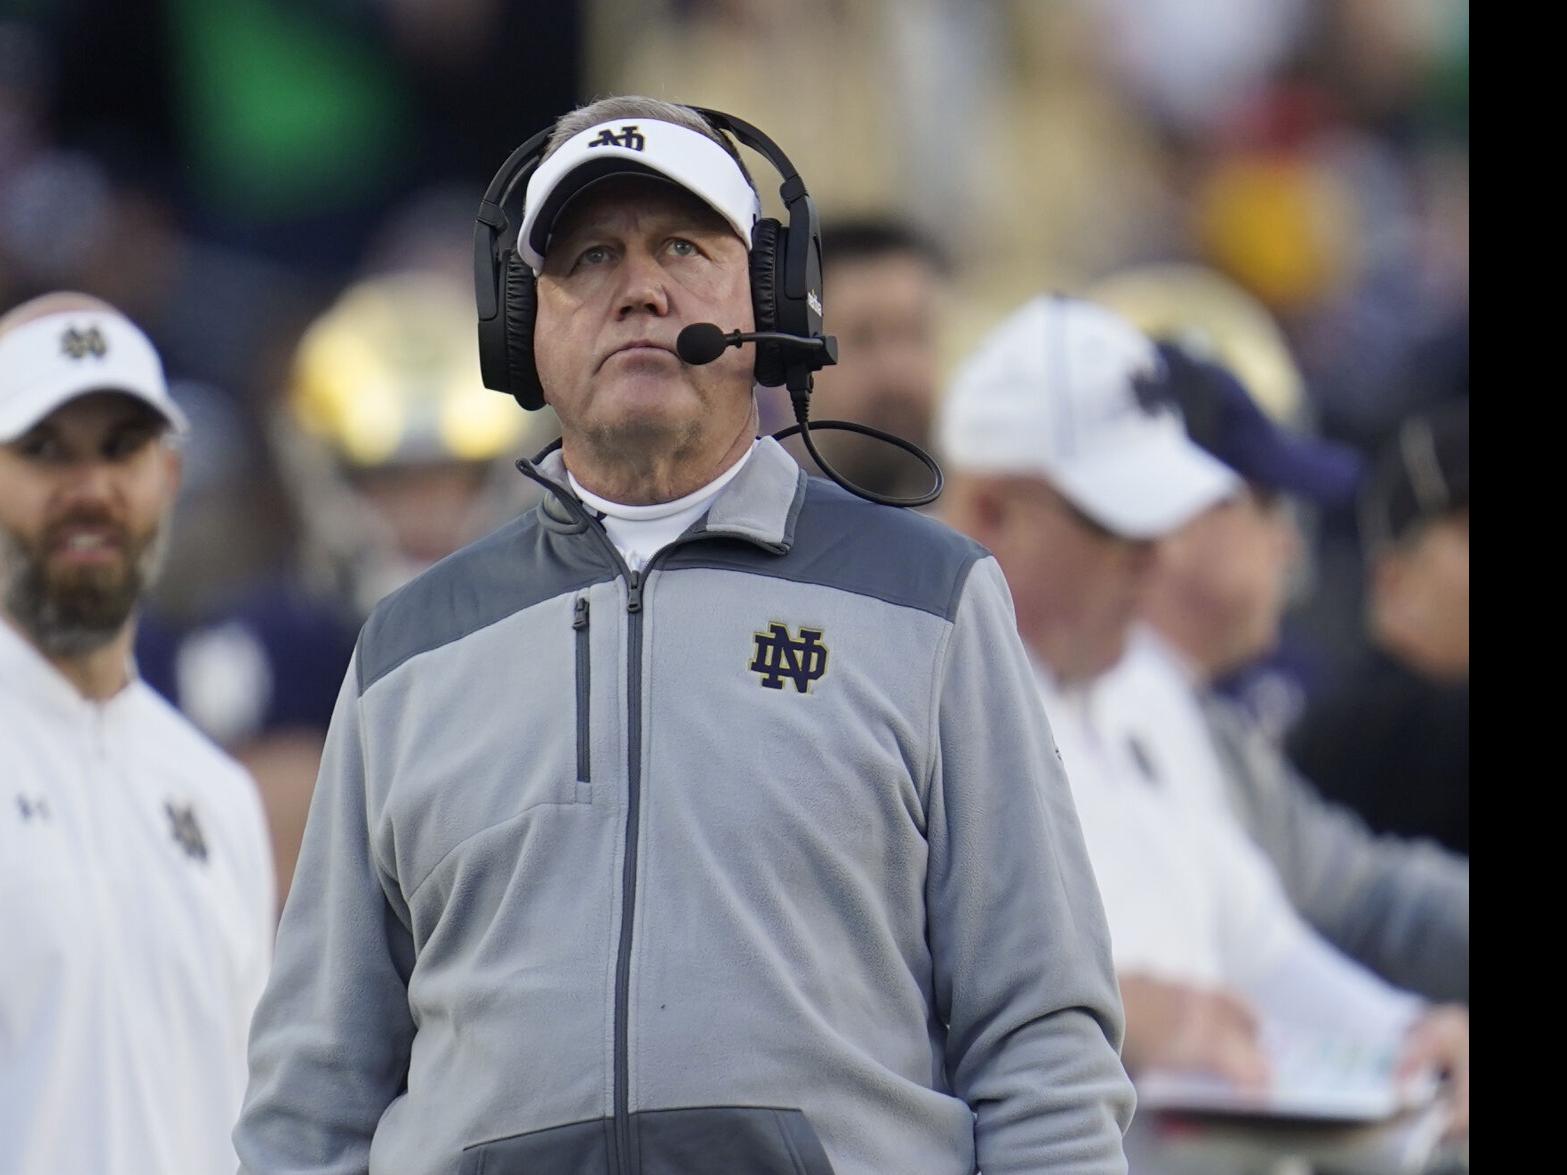 New LSU coach Brian Kelly to receive 10-year, $95 million contract